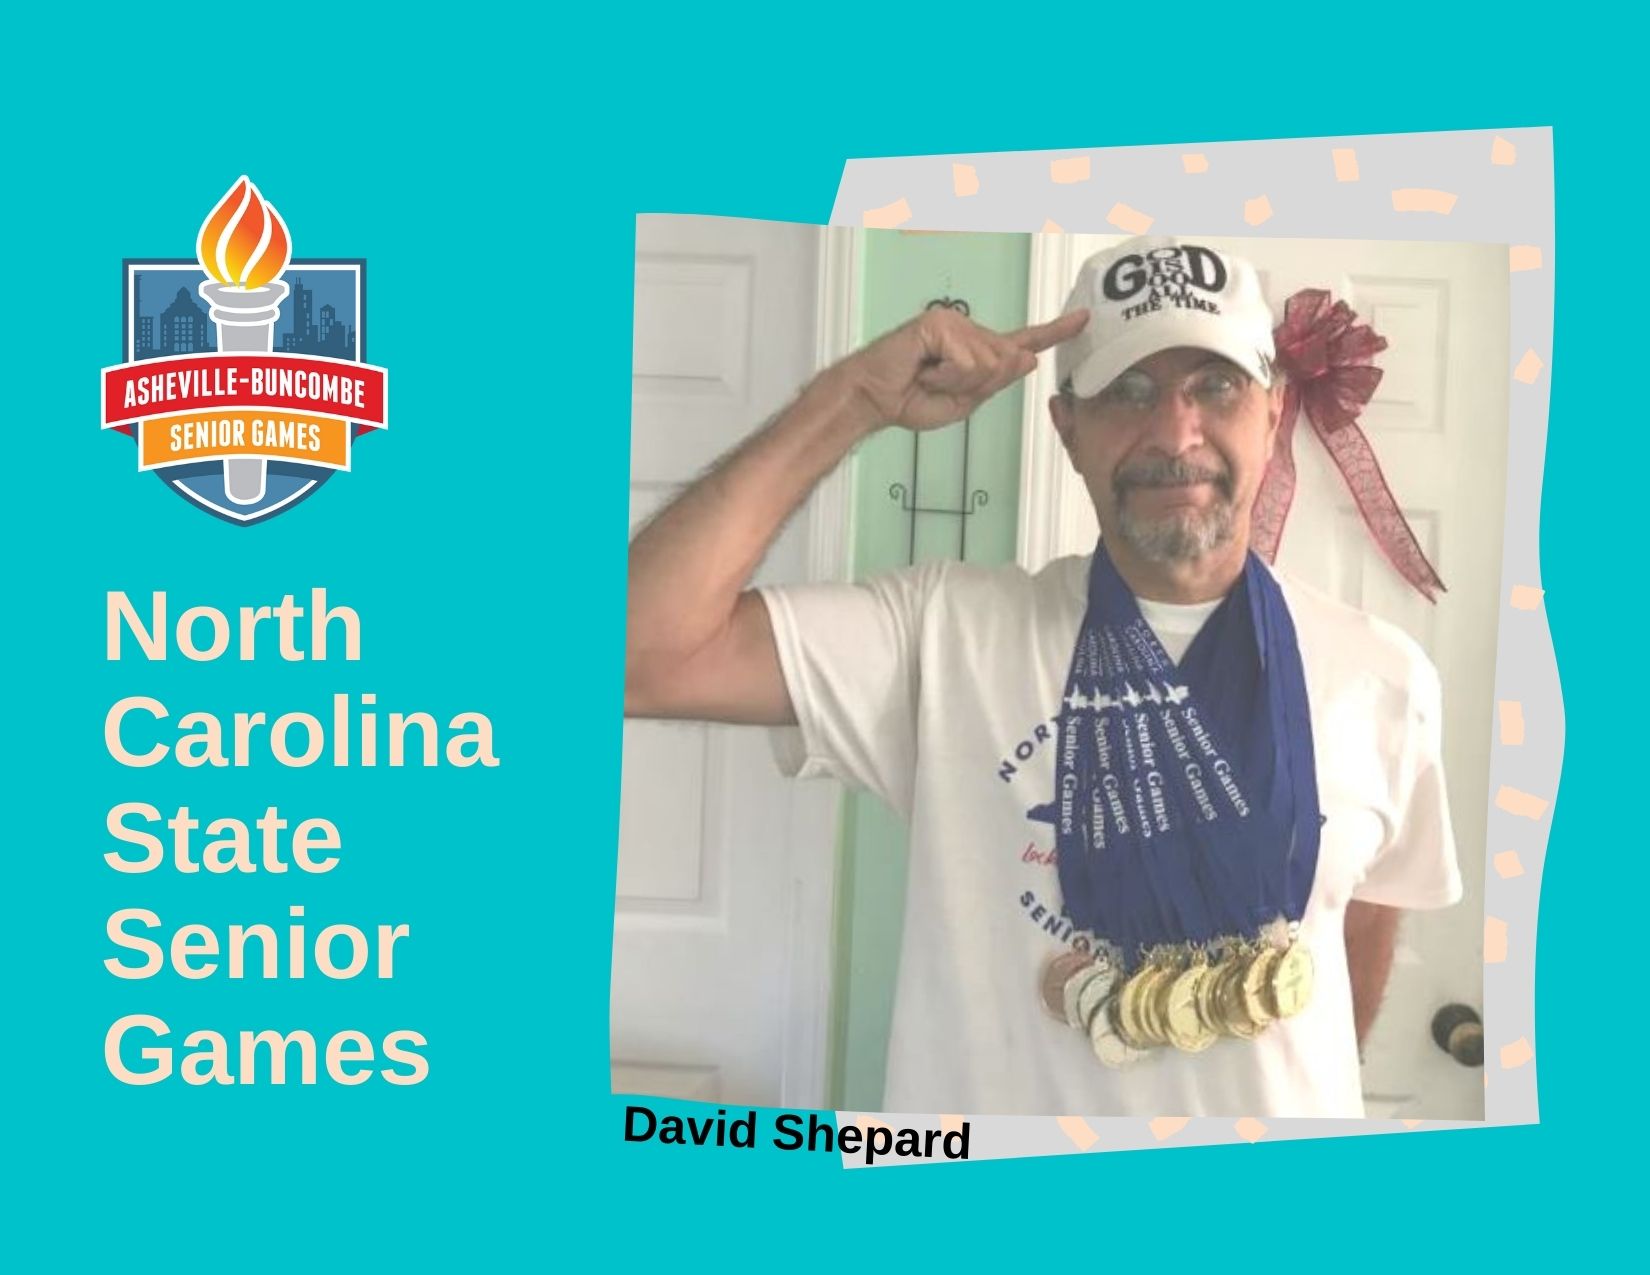 Local athlete wins at virtual State Senior Games finals The City of